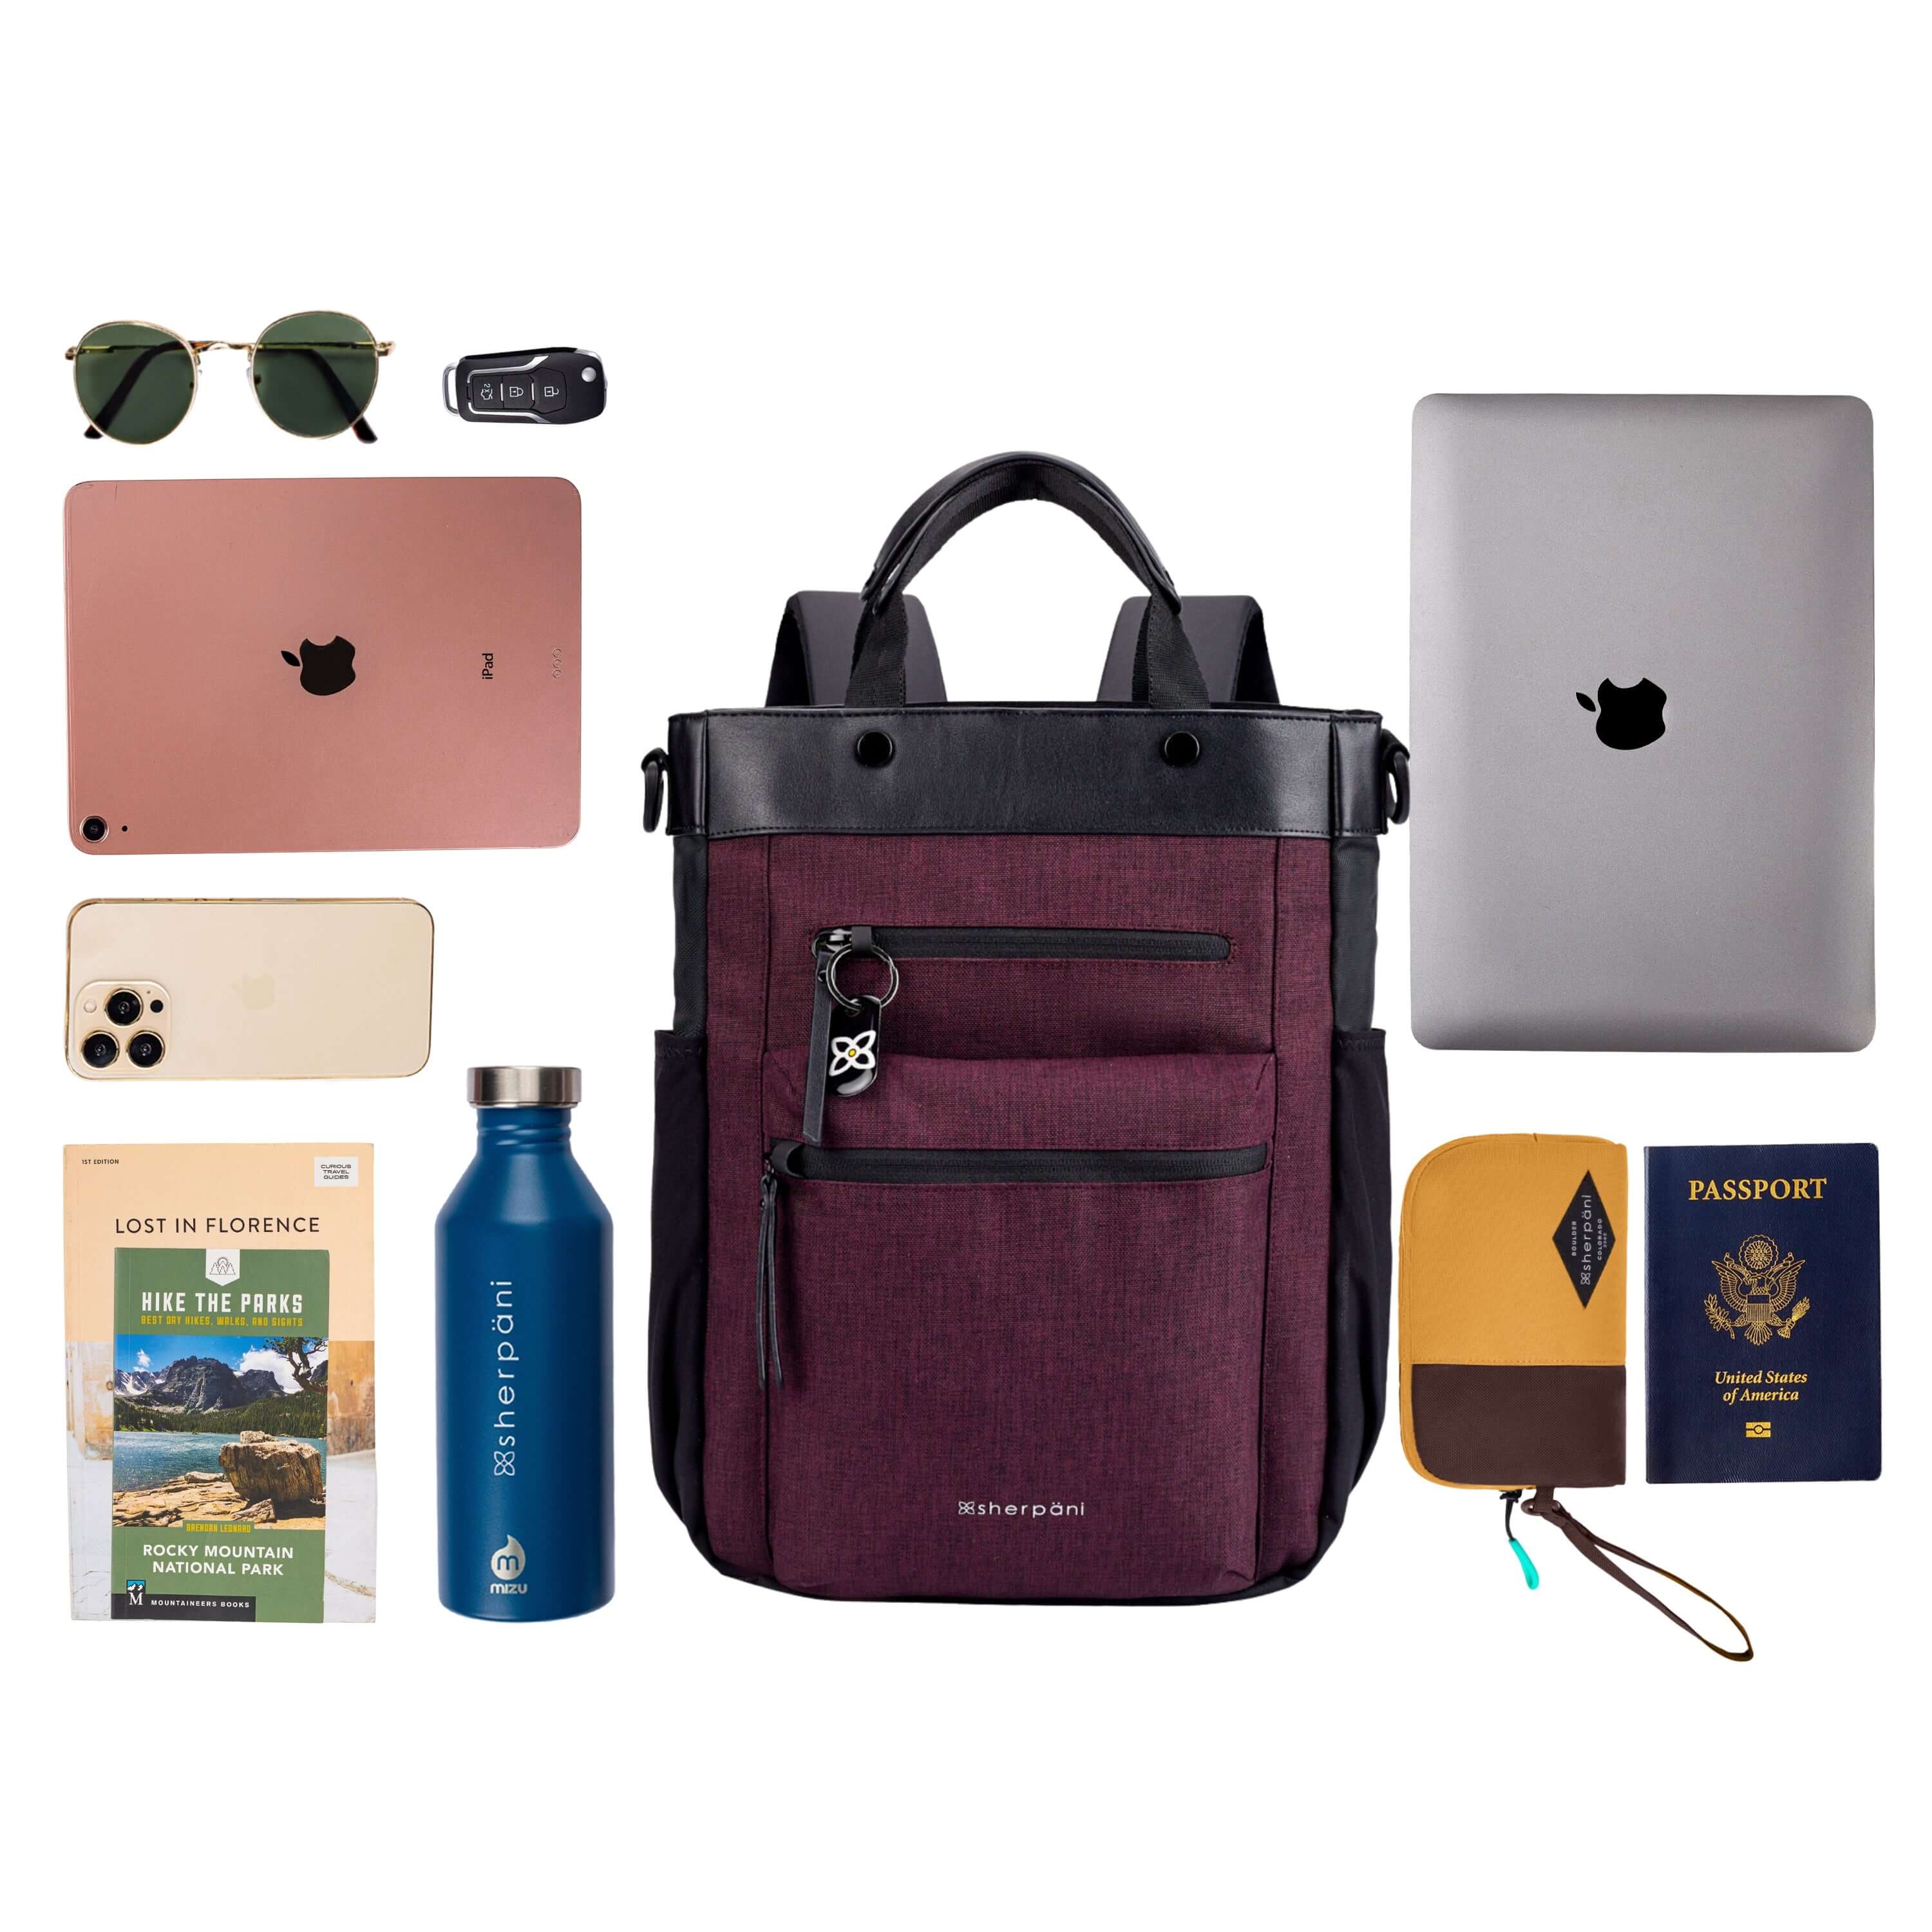 Sherpani | Latitude Carry on Suitcase & Soleil Travel Bag Bundle Merlot Carry-On Luggage / Sterling Soleil